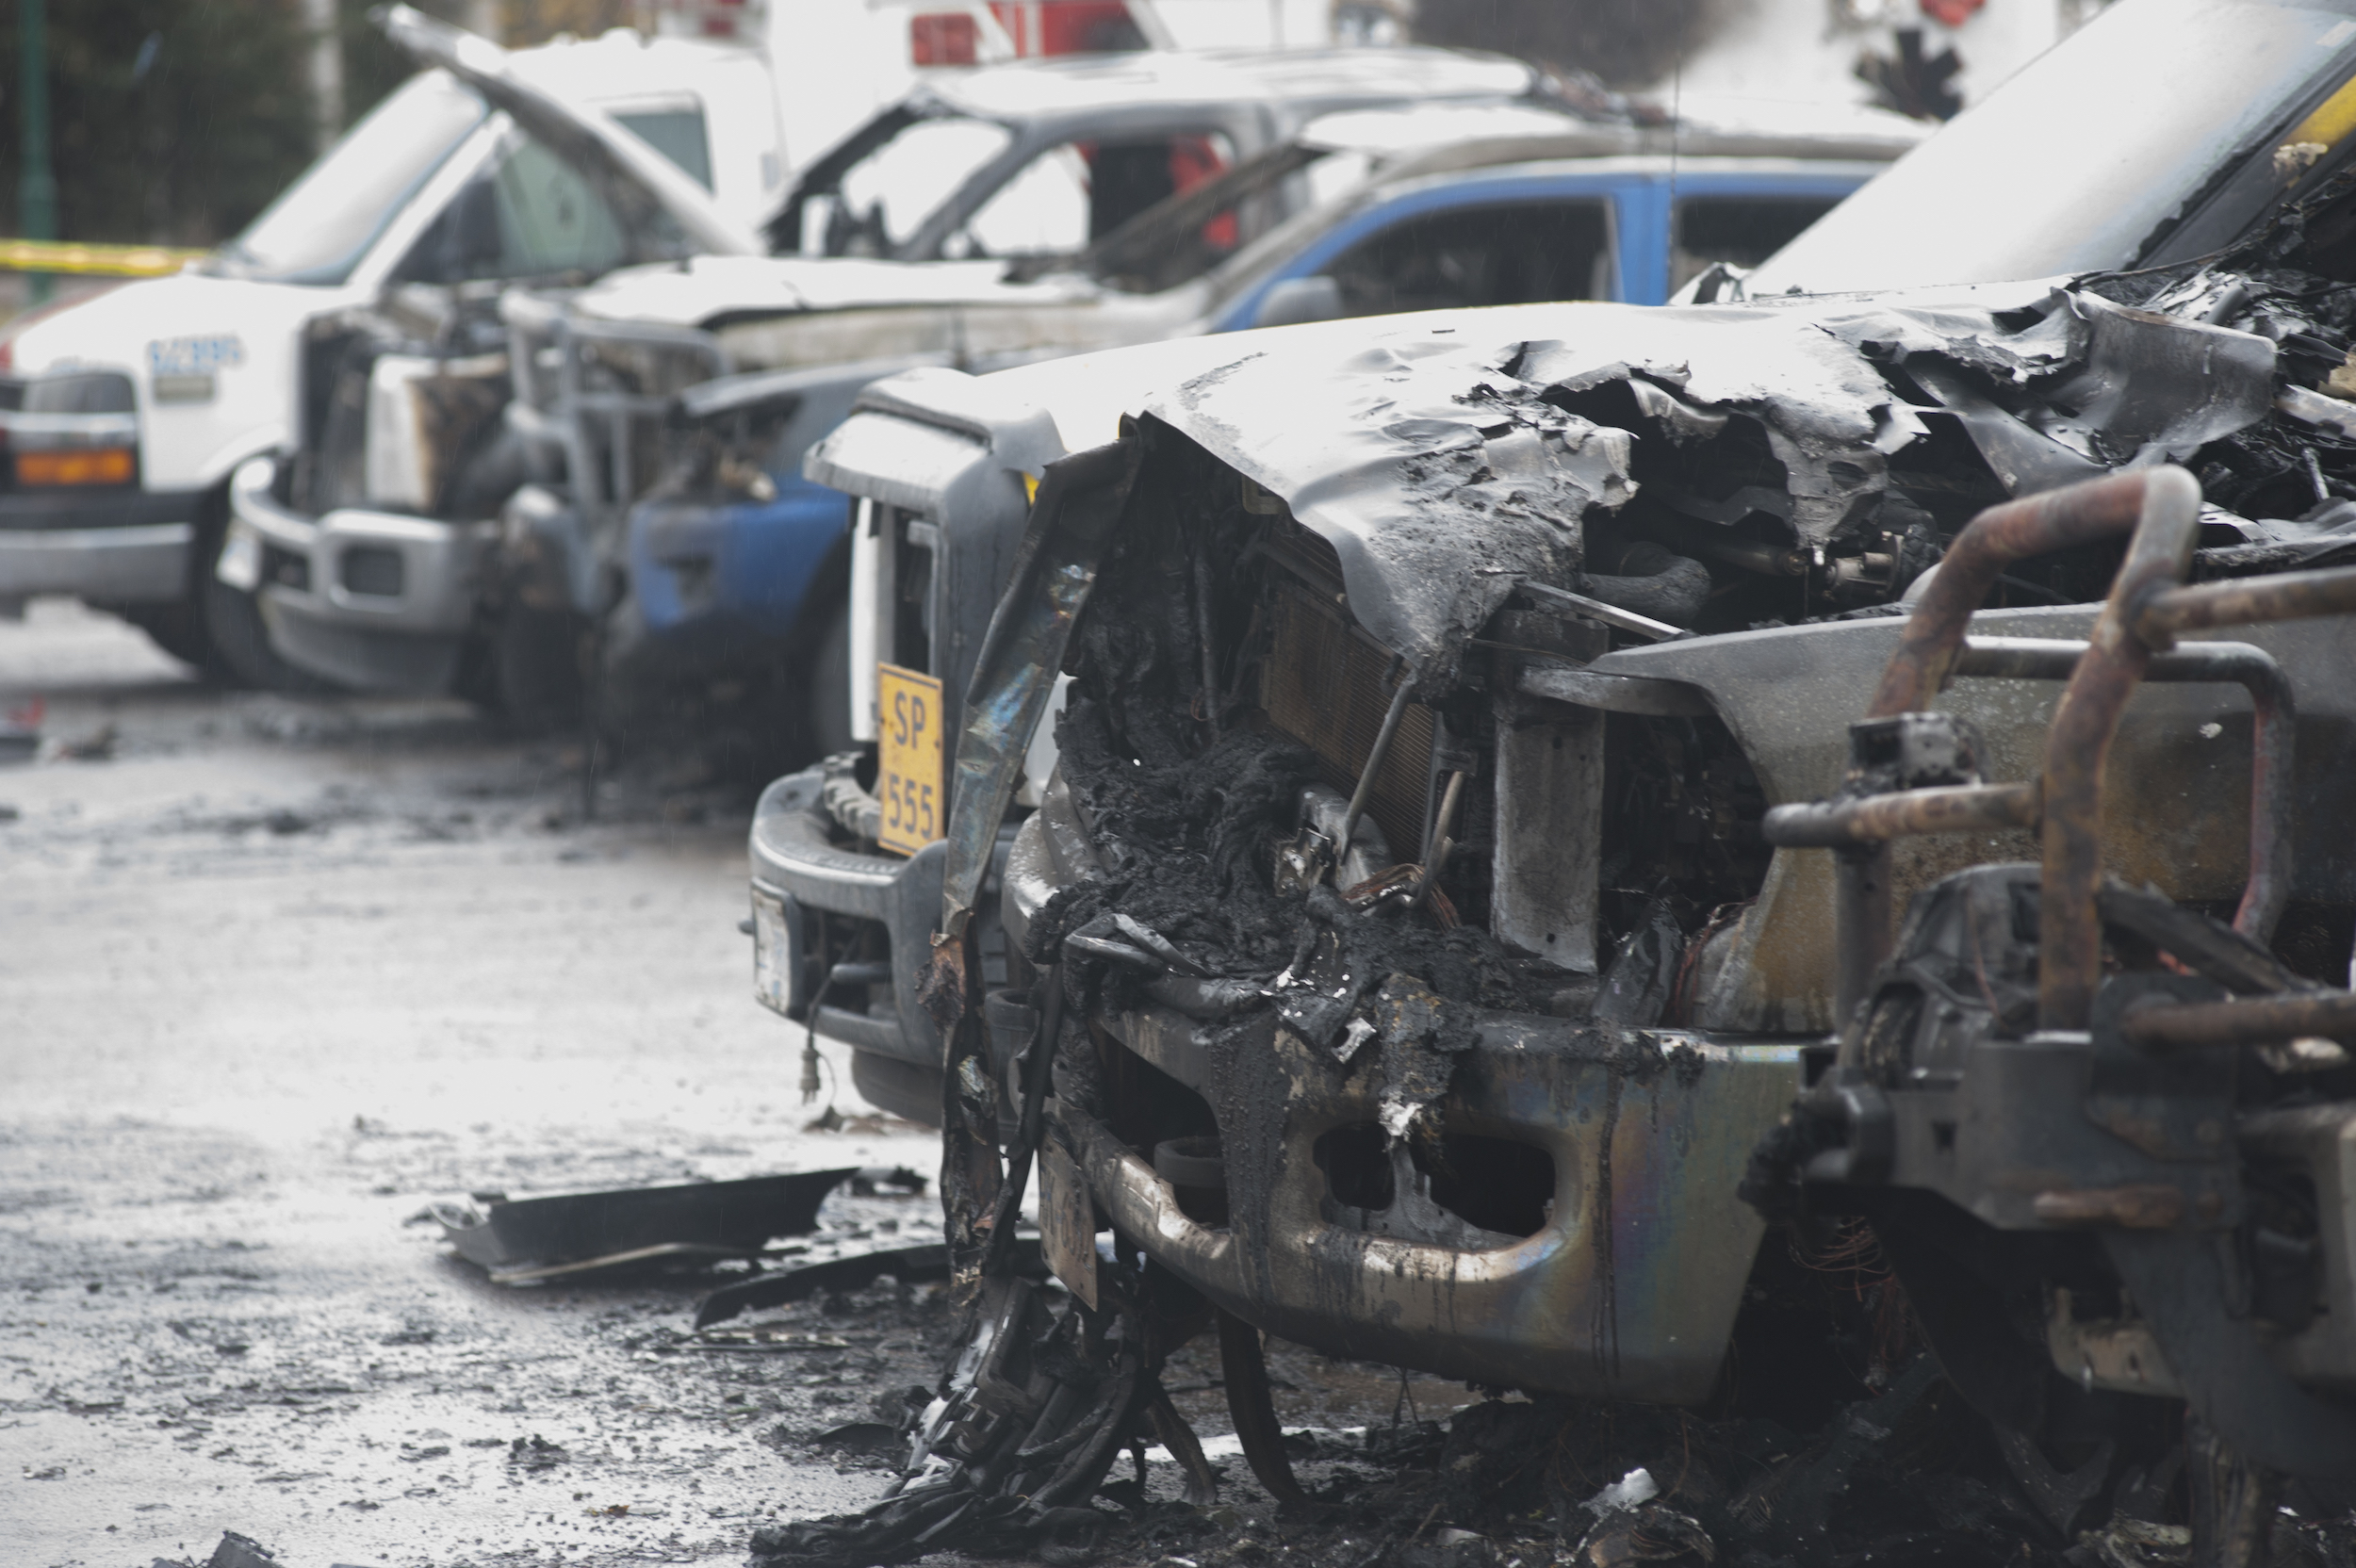 Burned vehicles sit in a Smithers, B.C. parking lot after an alleged arson on Oct. 26, 2022